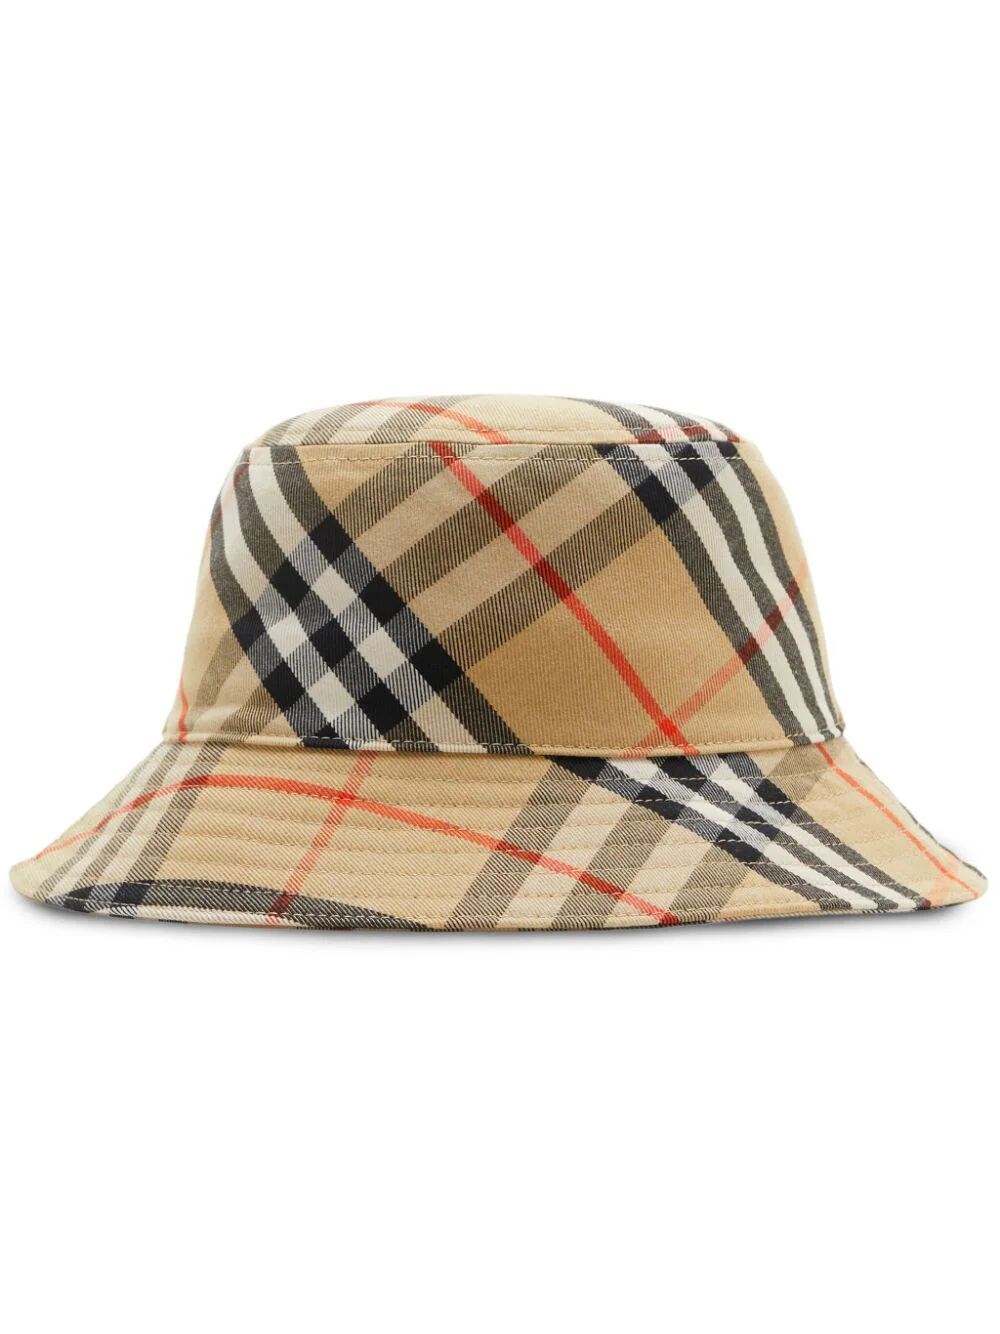 Burberry Check Cotton Blend Bucket Hat In Nude & Neutrals